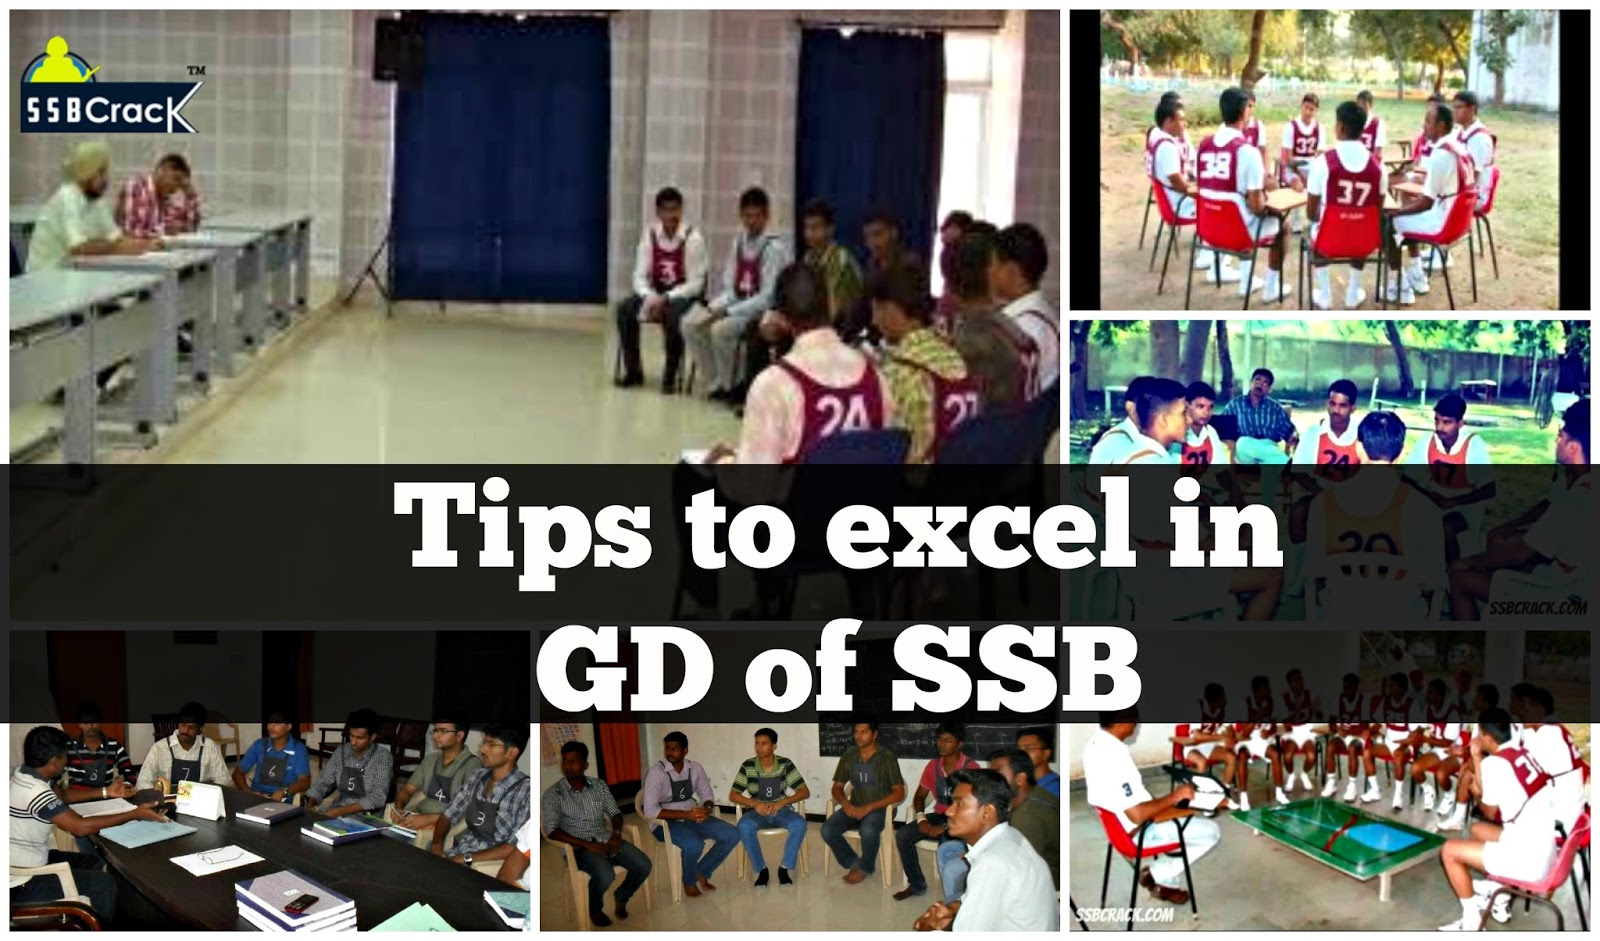 Tips to excel in GD of SSB